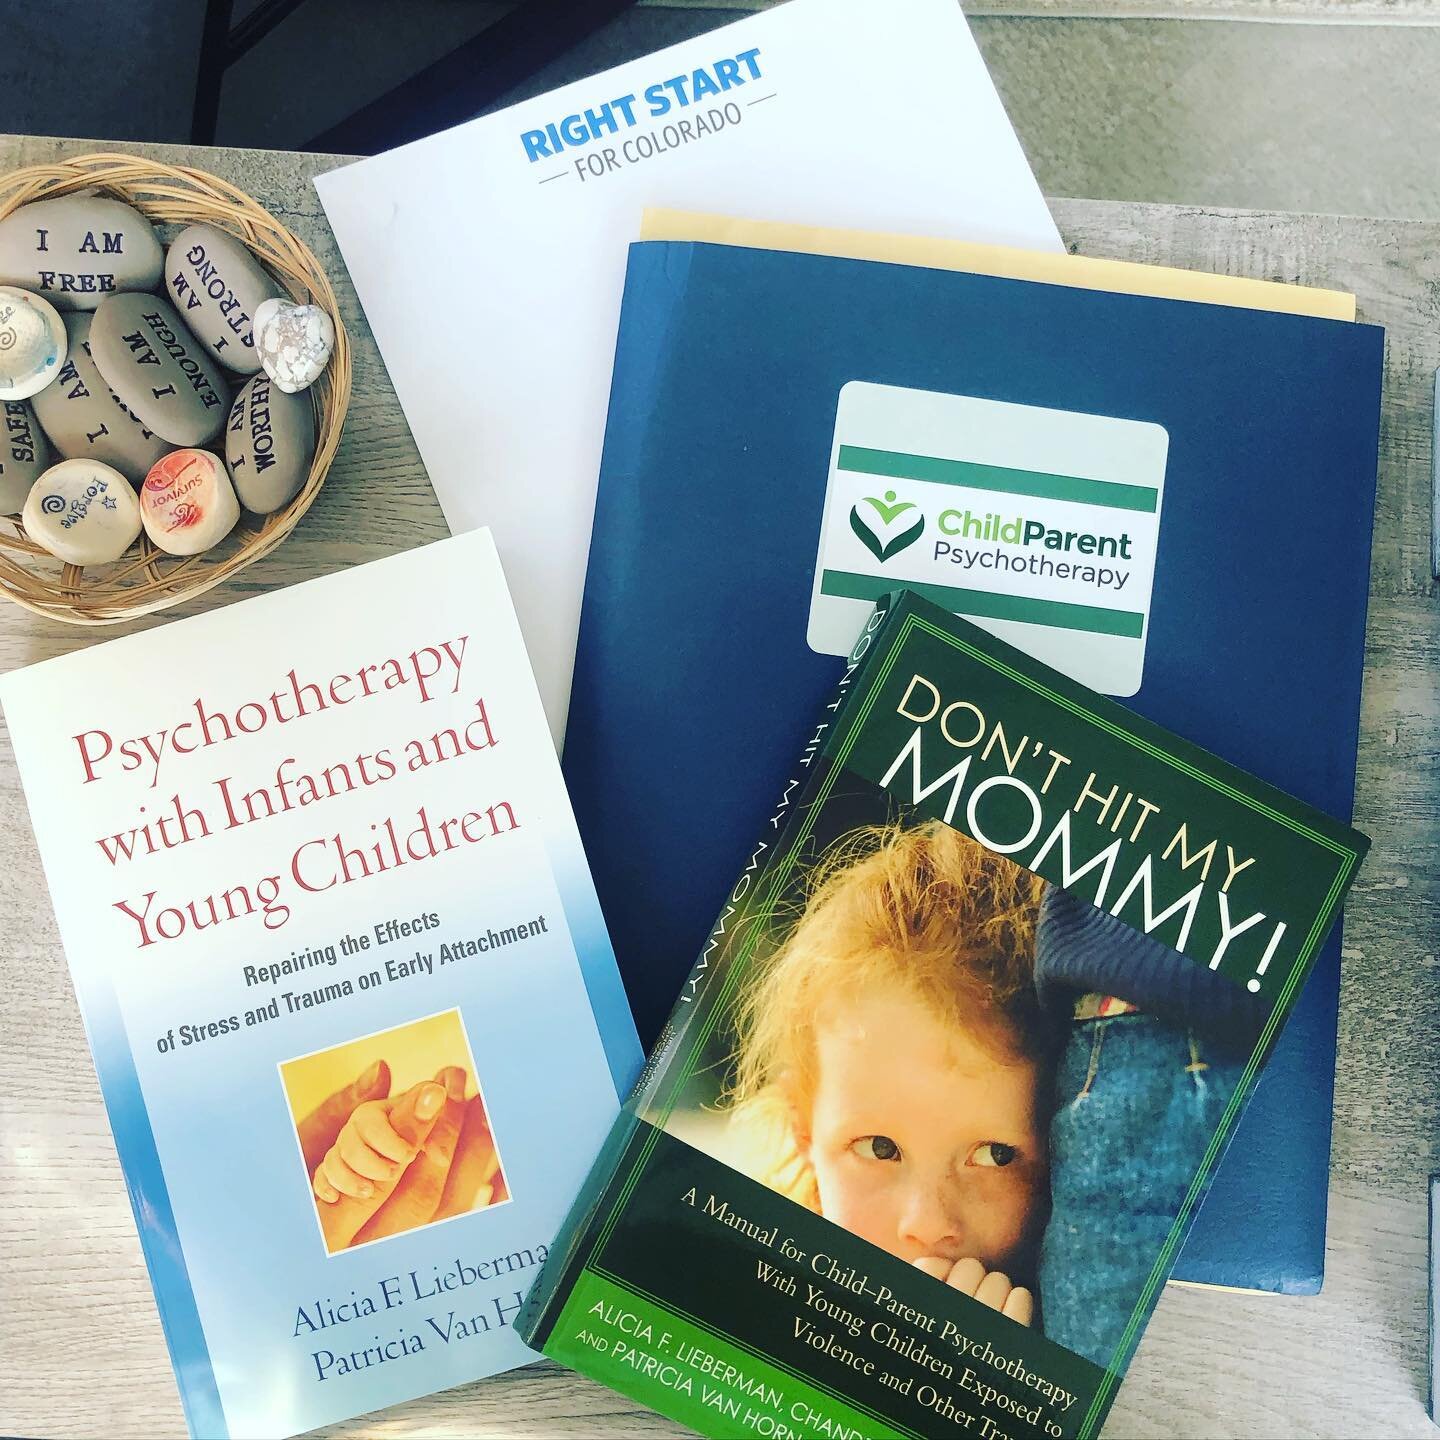 Nerding out moment 🤓I have wanted trained in CPP for so long, since before I was even licensed. I knew this modality would be the best of the things I love about therapy and try to keep myself grounded in: attachment, infant mental health, relations